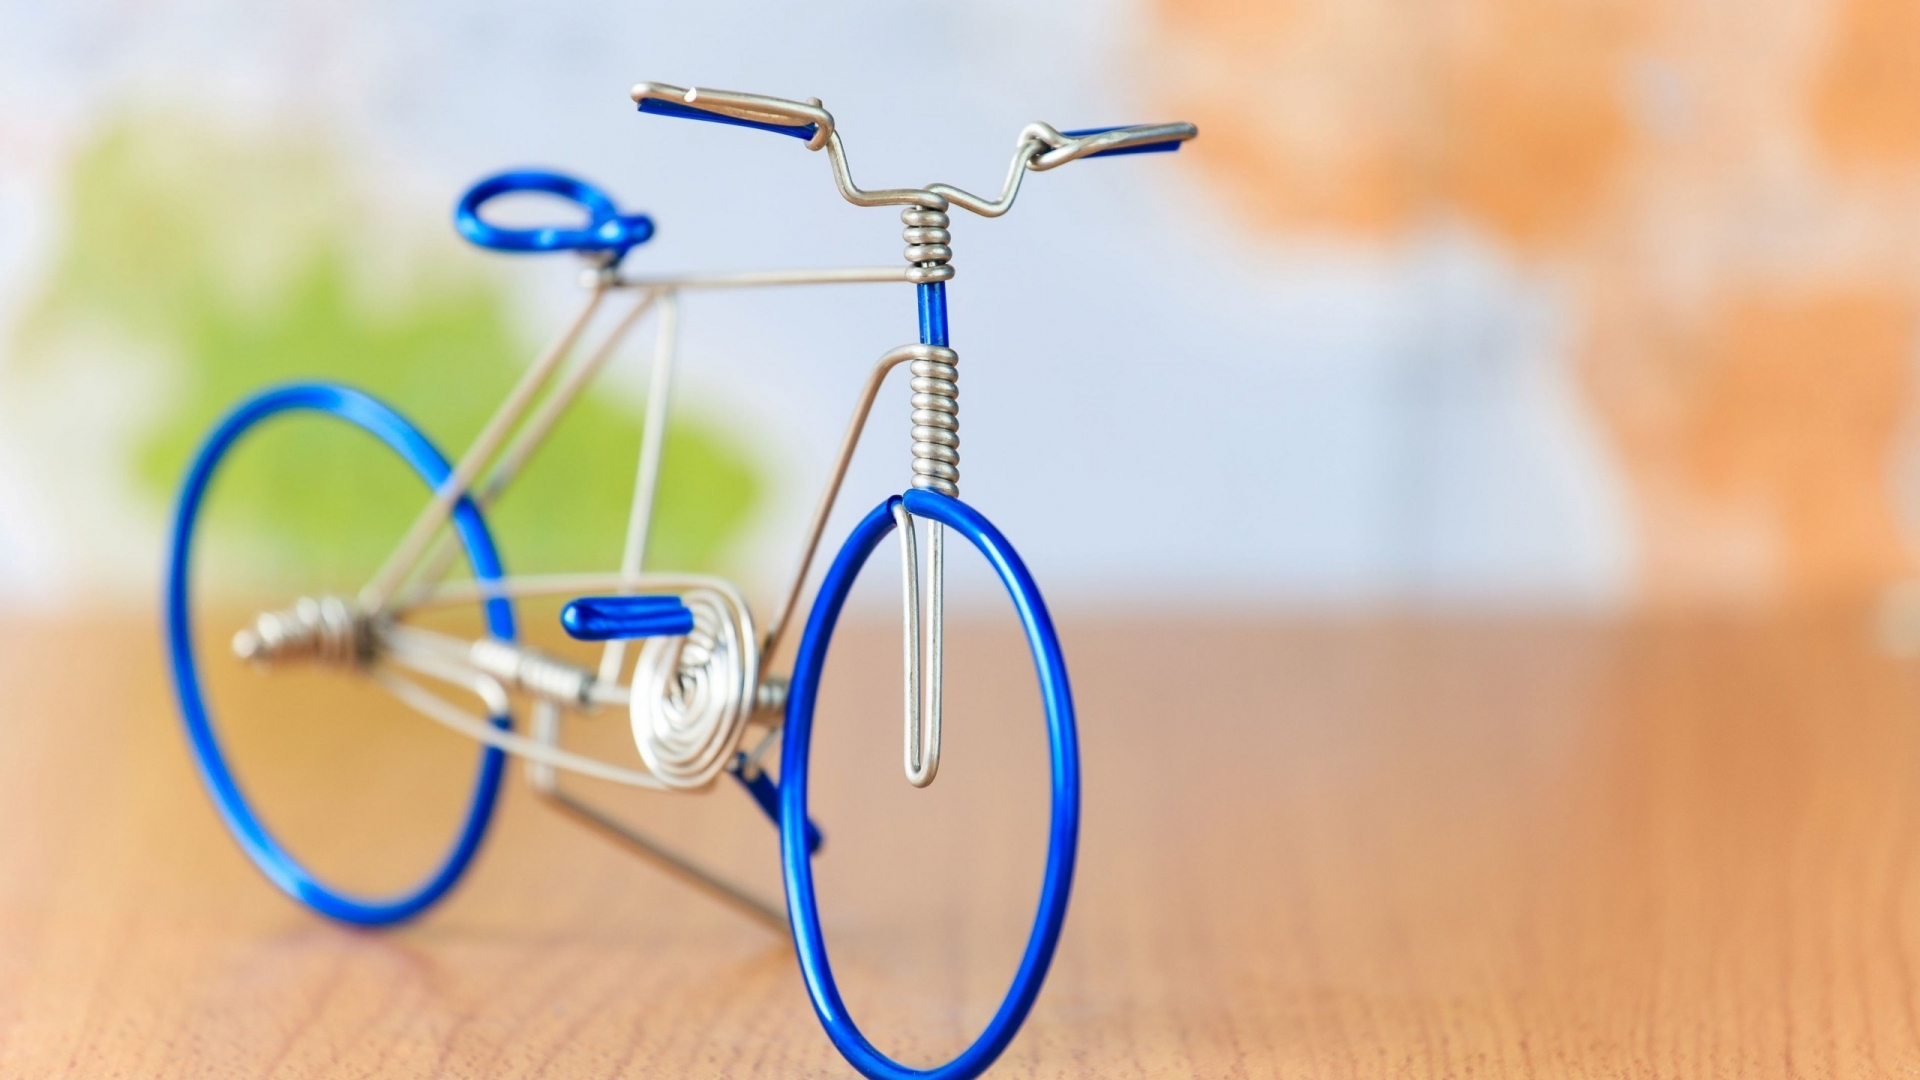 Handmade Bicycle for 1920 x 1080 HDTV 1080p resolution